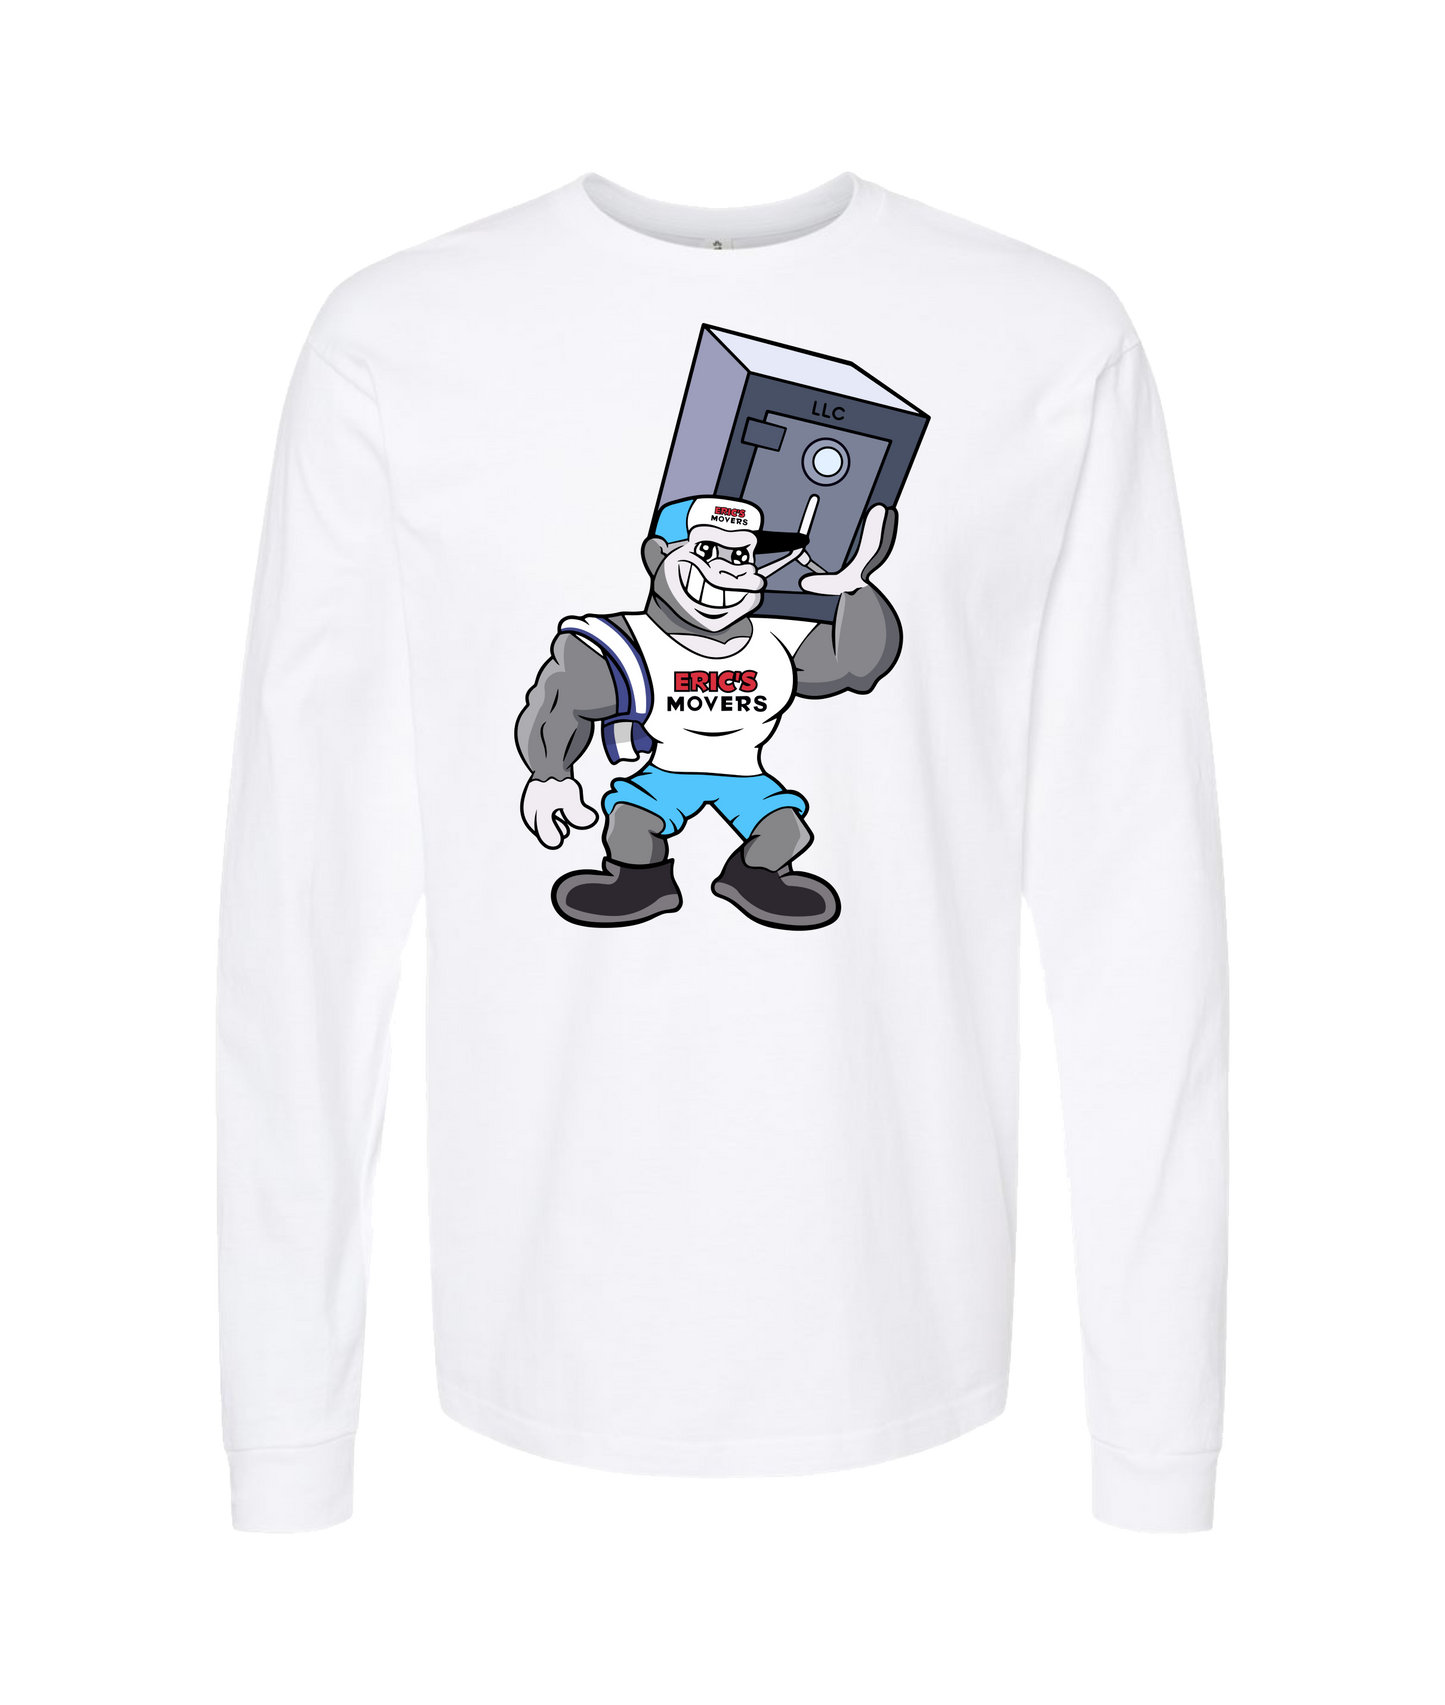 Eric's Movers - One Arm - White Long Sleeve T